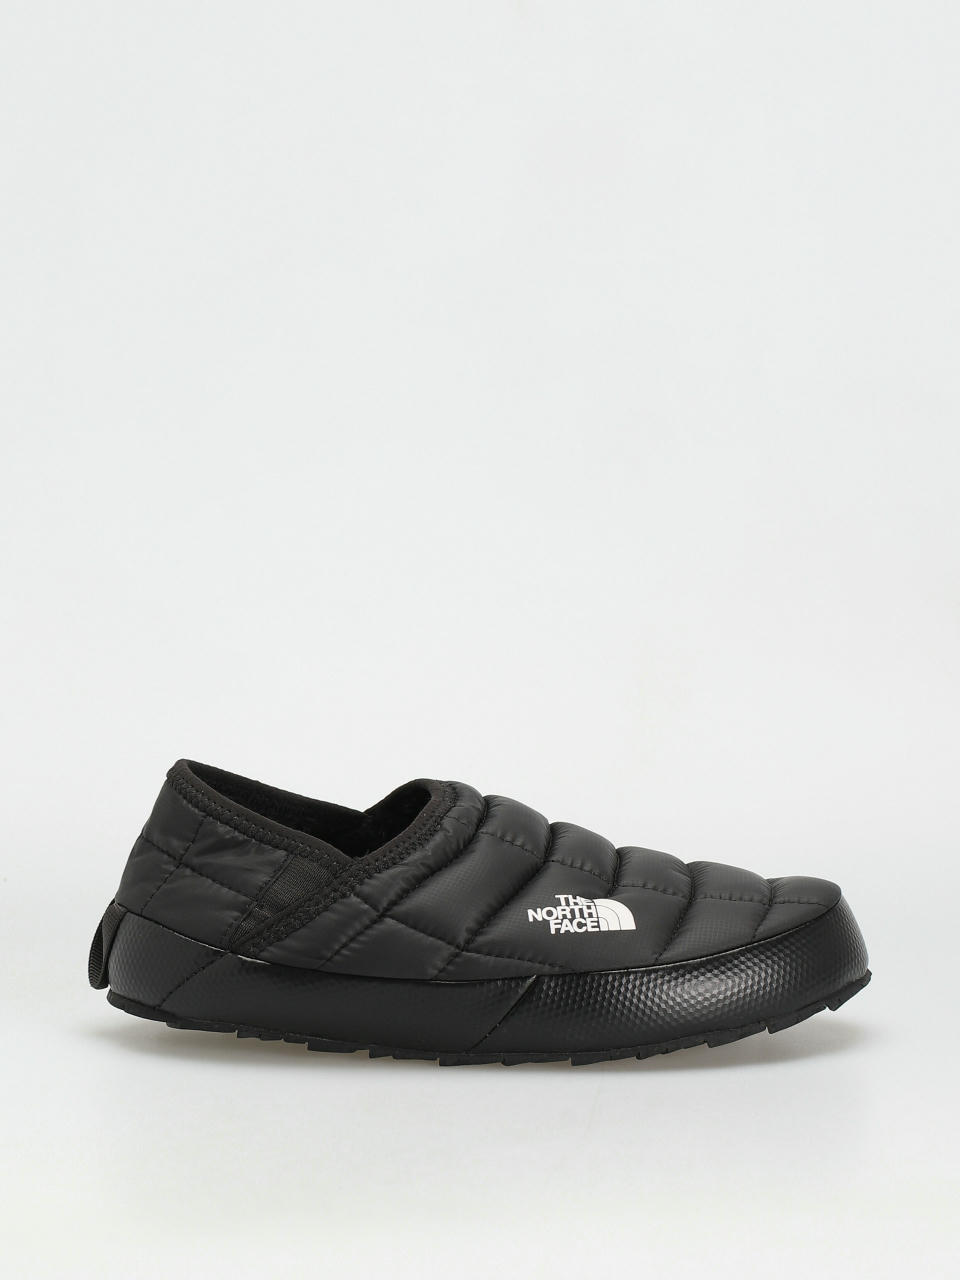 Topánky The North Face Thermoball Traction Mule V Wmn (tnf black/tnf black)